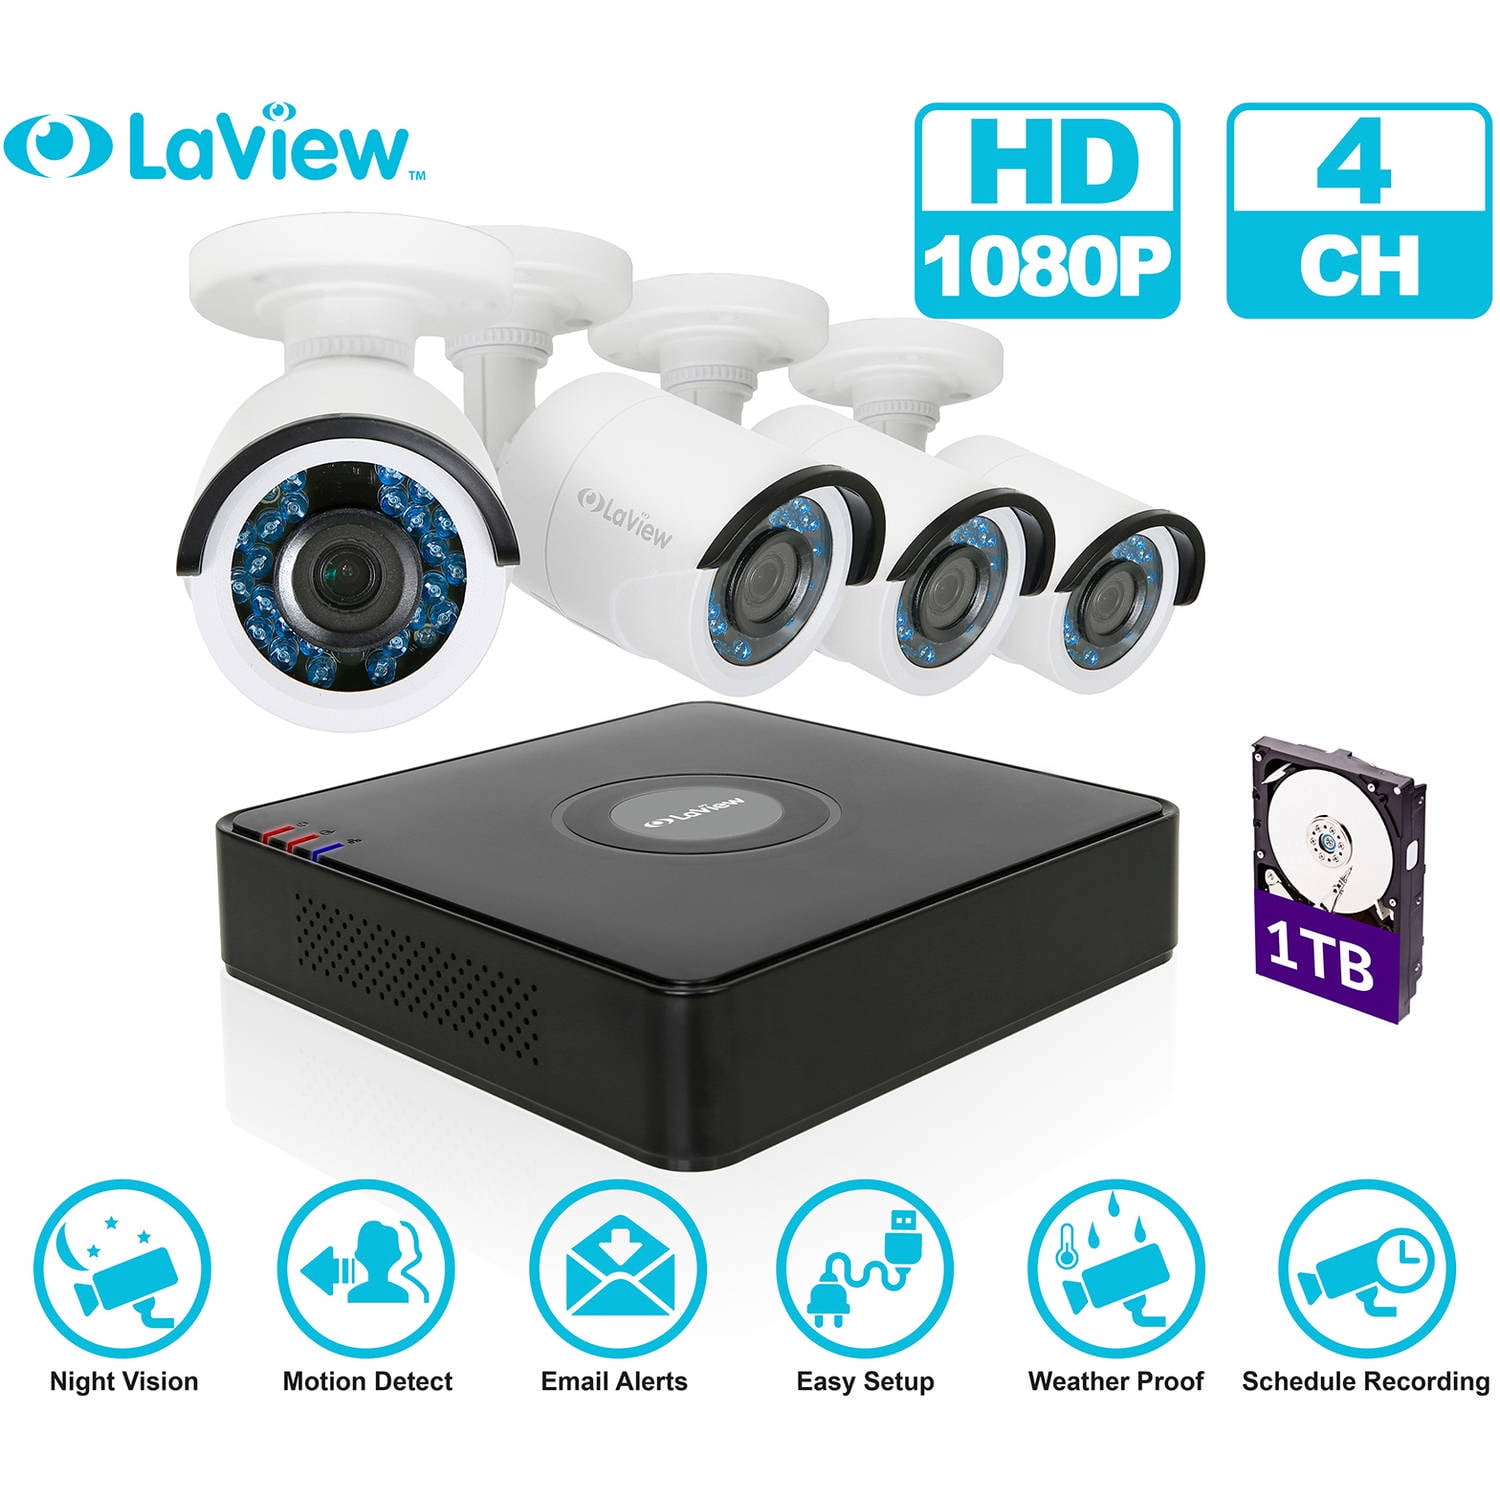 LaView 1080P HD 4 Security Cameras 4CH 